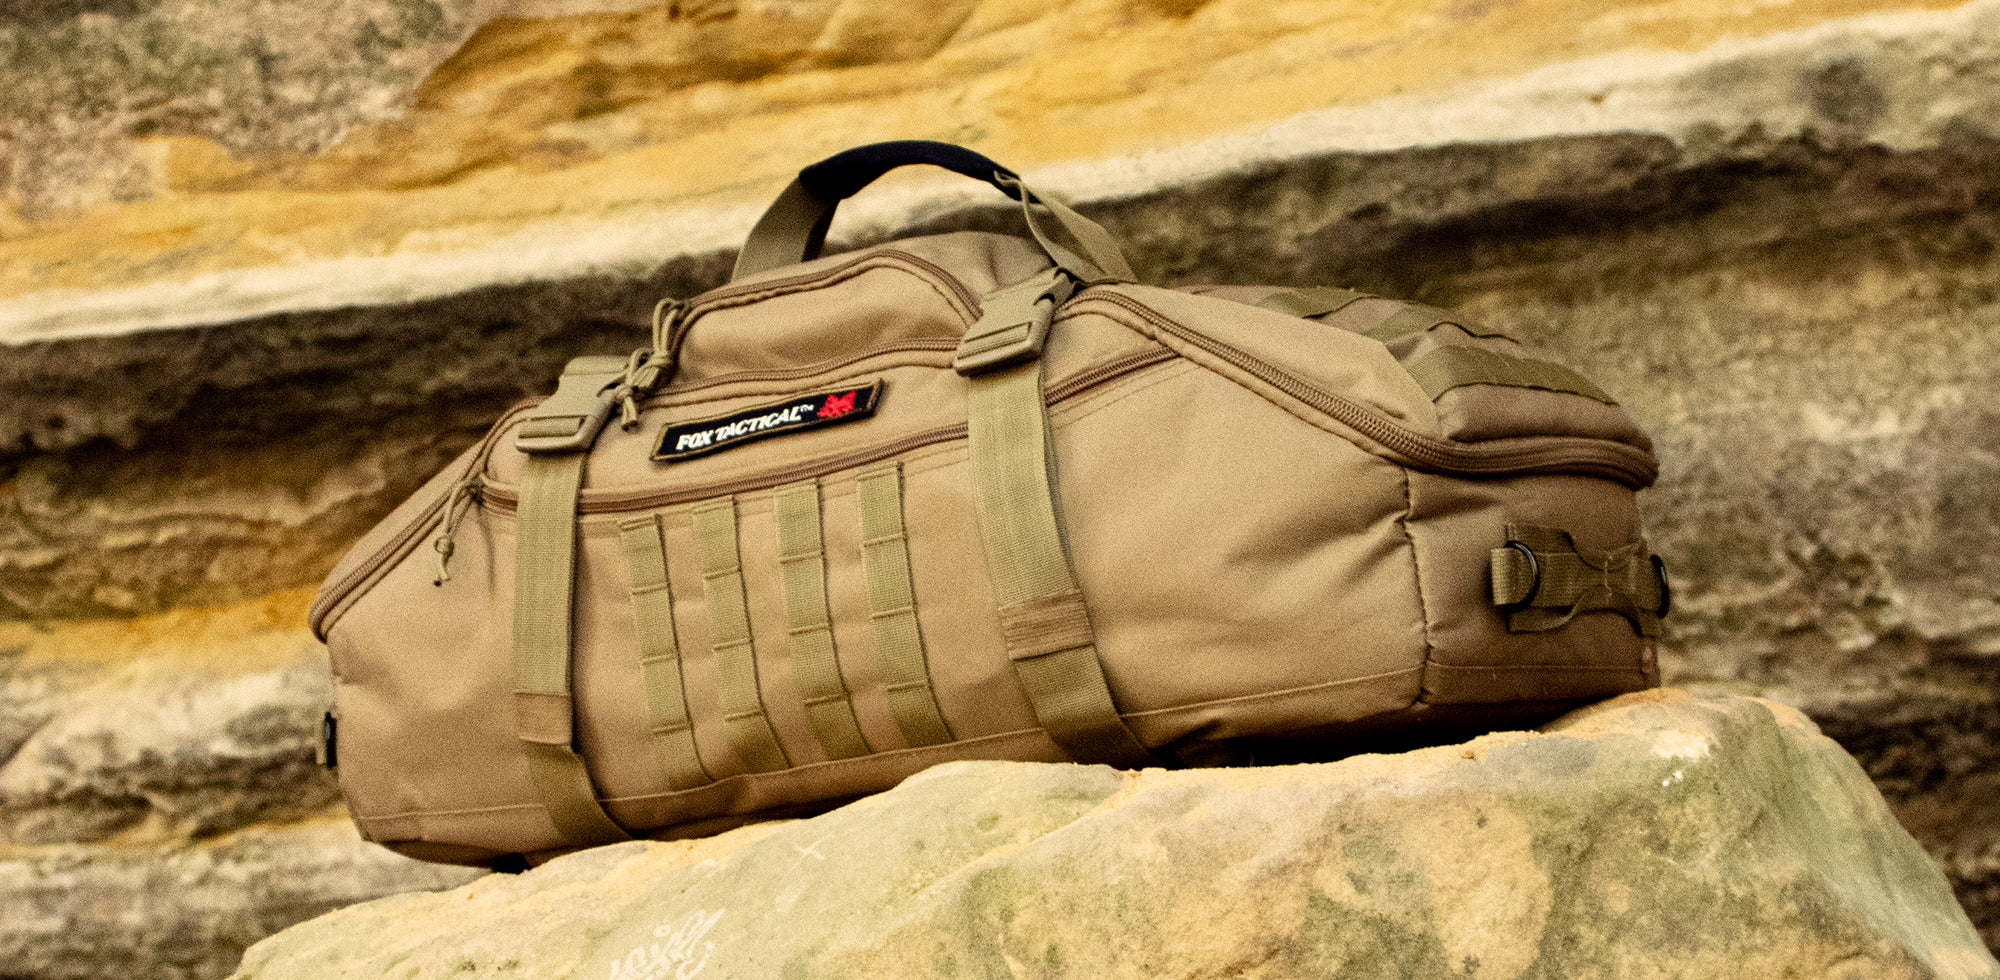 3-in-1 Recon Bag in coyote - Shop all Tactical Bags